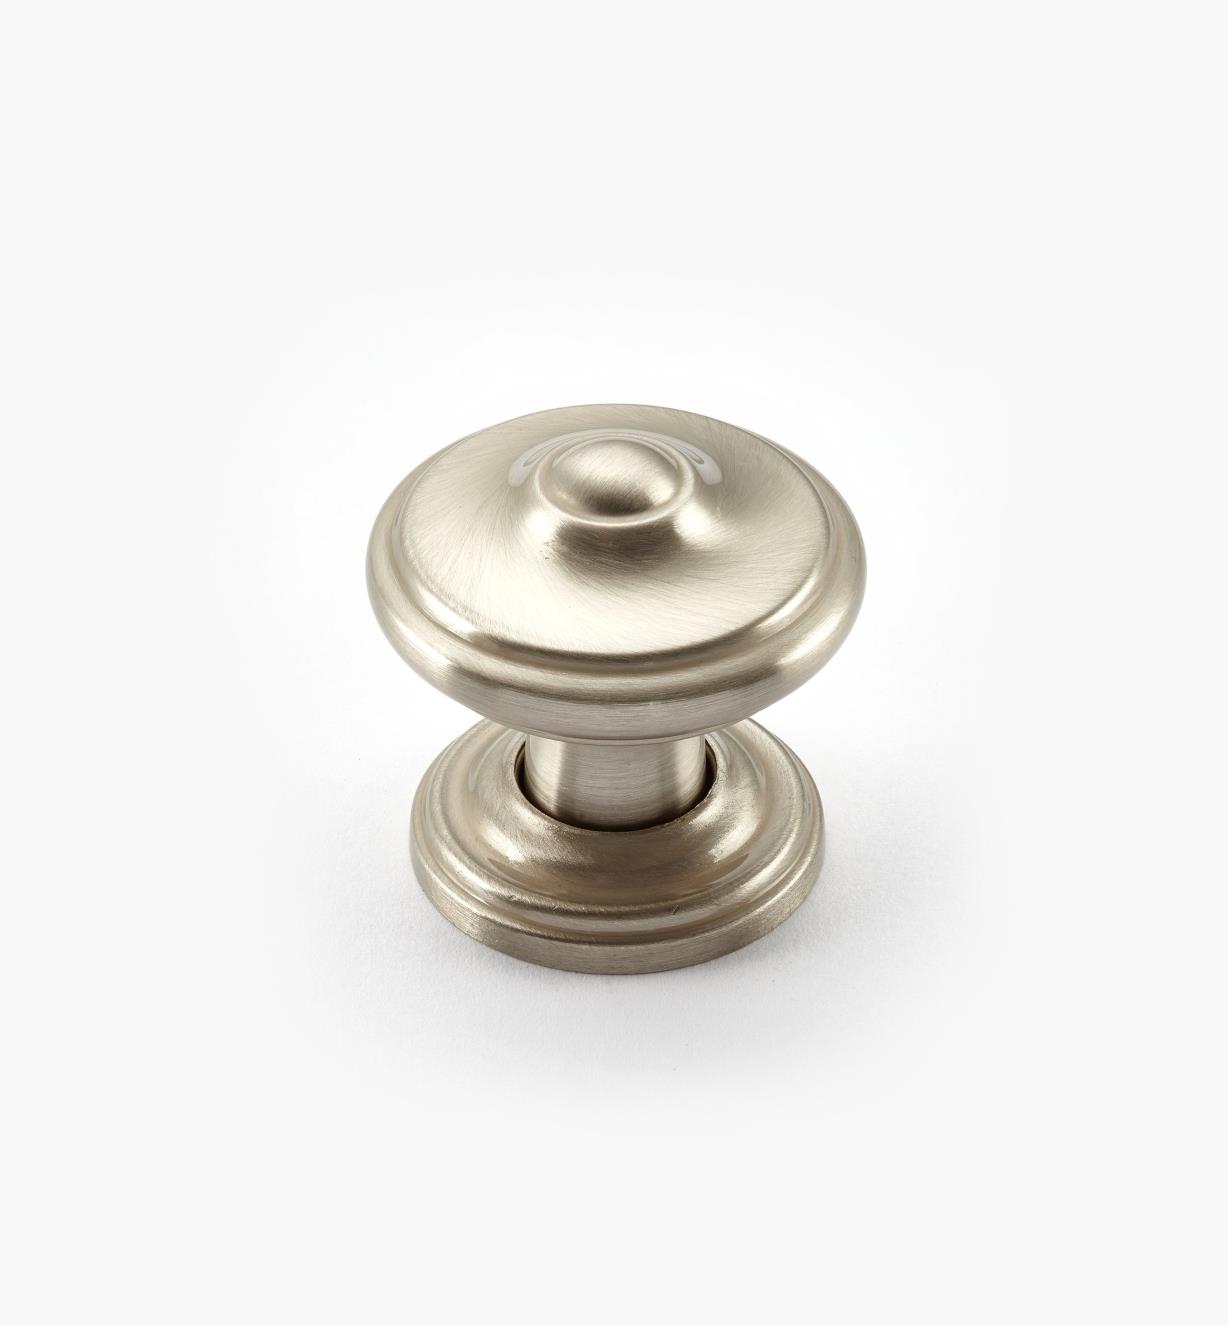 02A1681  - Revitalize SC 1 1/4" Peaked Round Knob, each